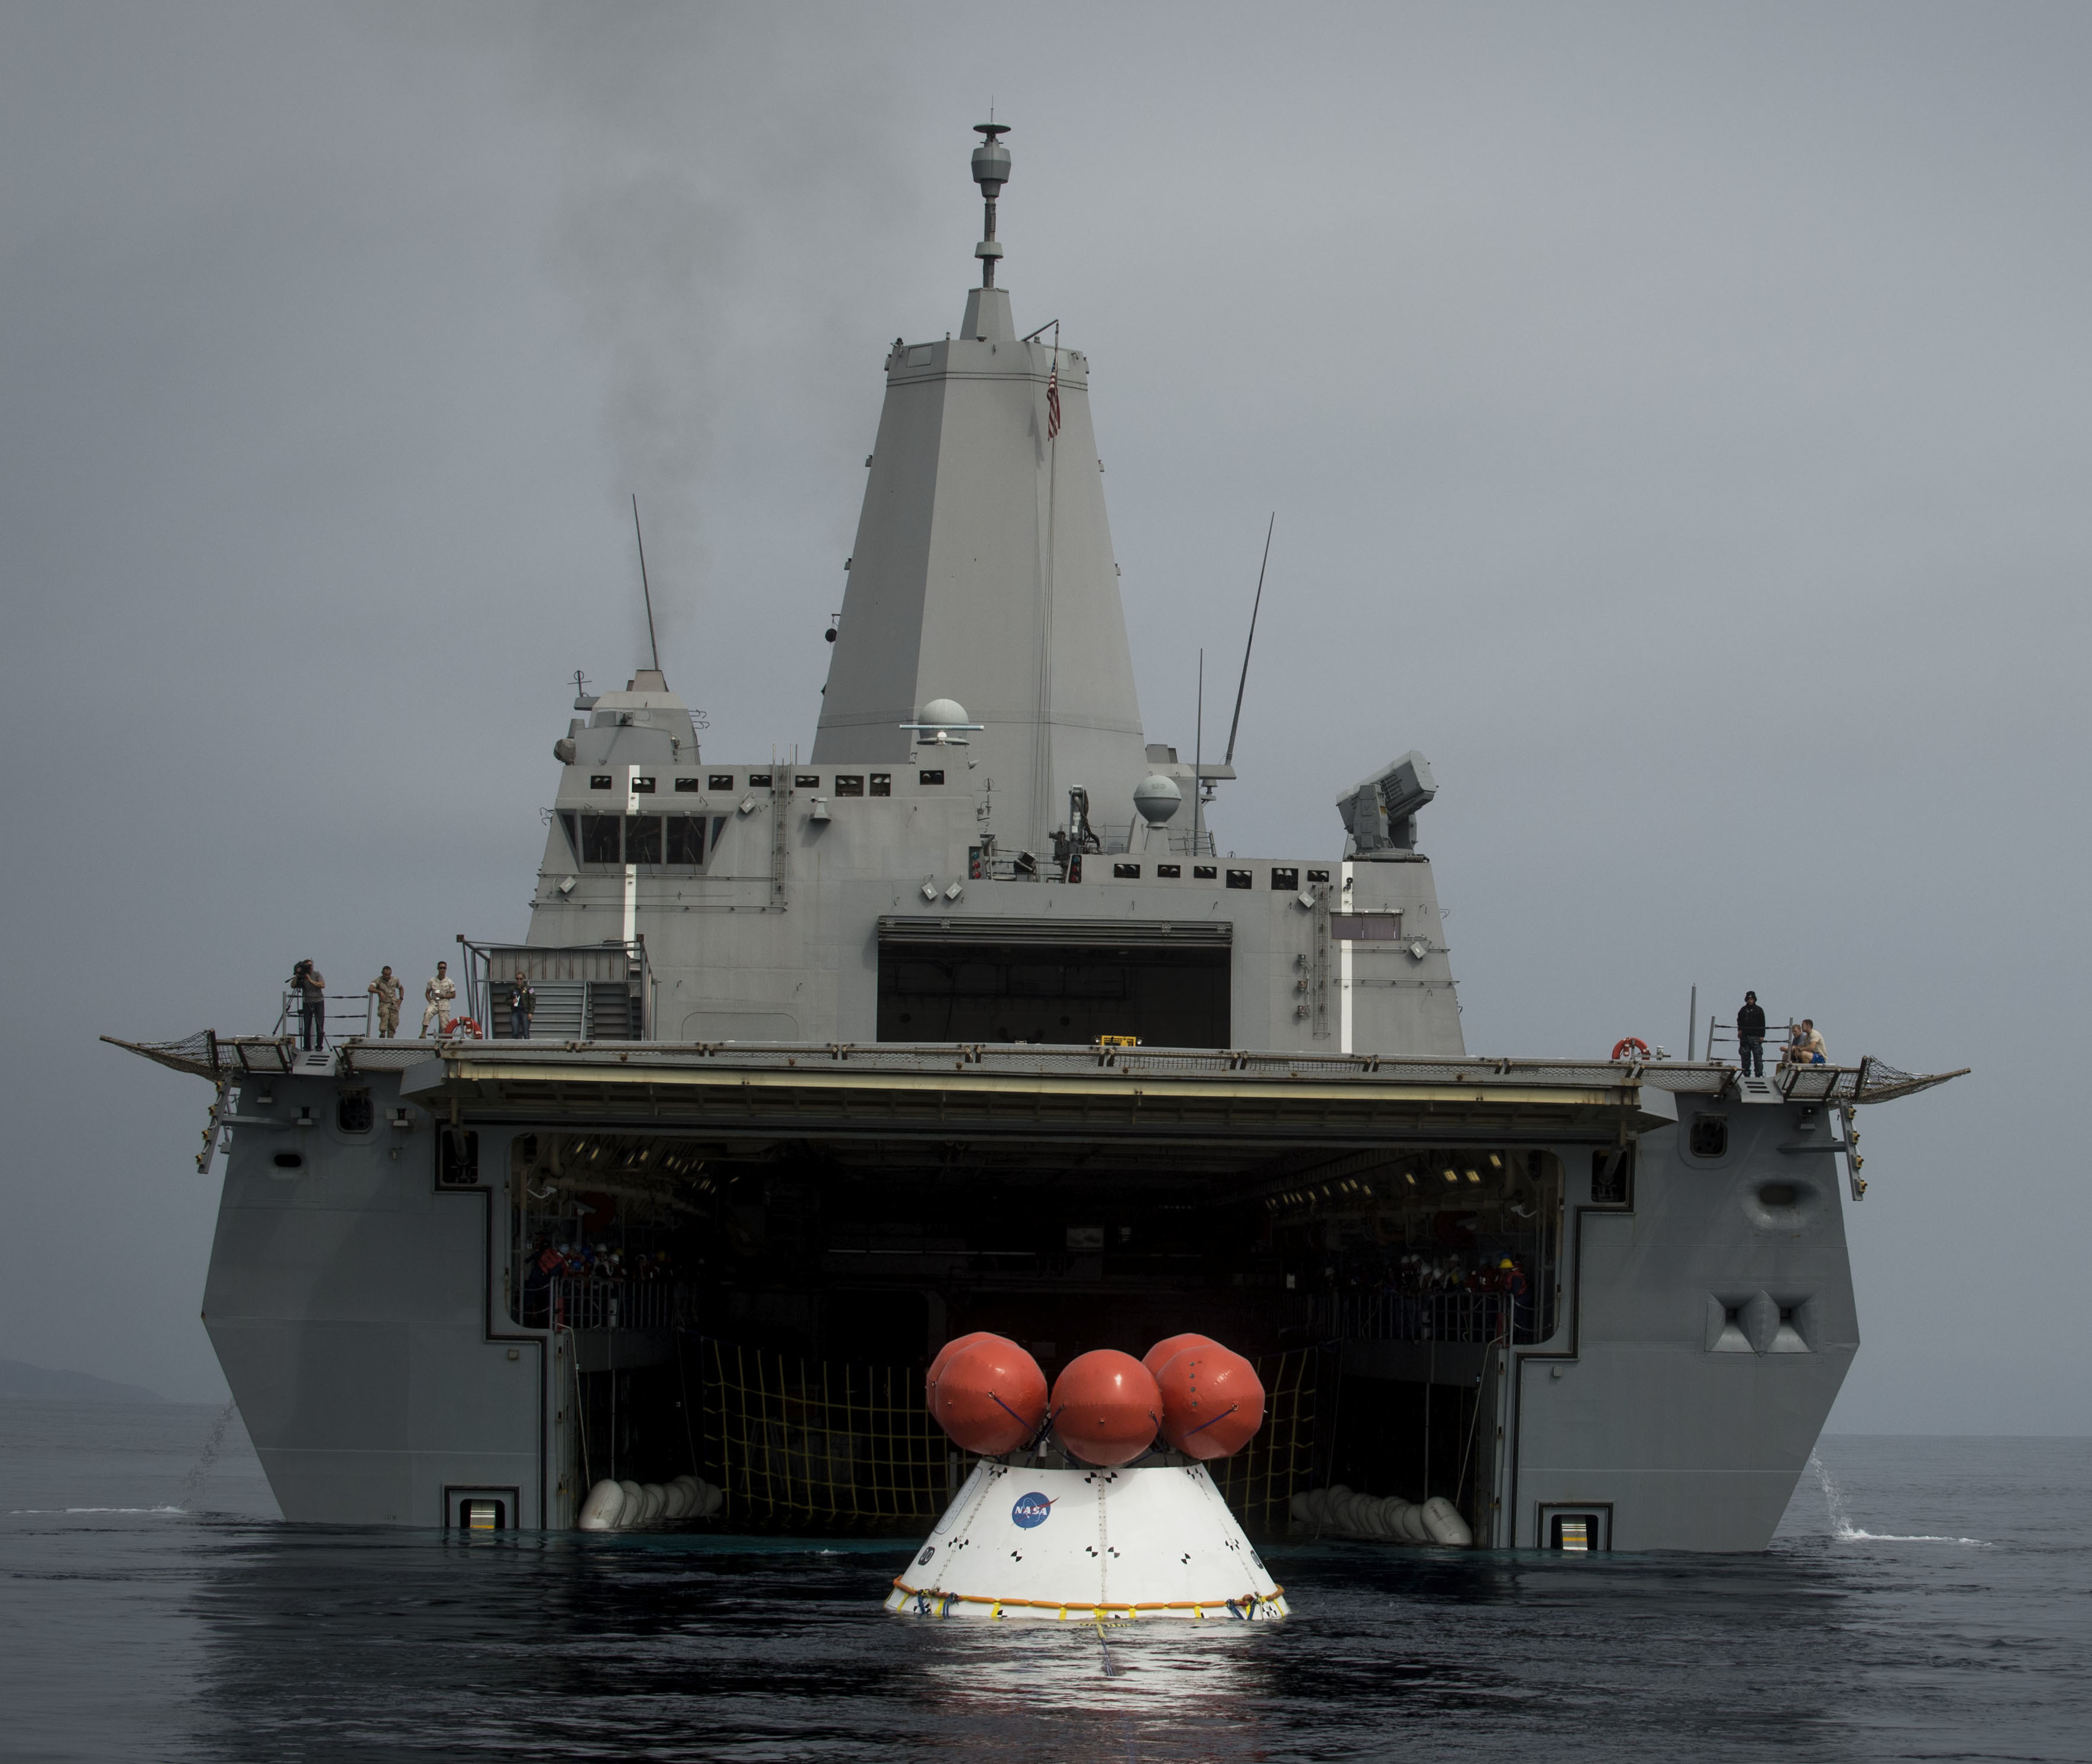 The Orion test capsule enters the welldeck of USS Anchorage (LPD-23) as part of ongoing testing. US Navy Photo 